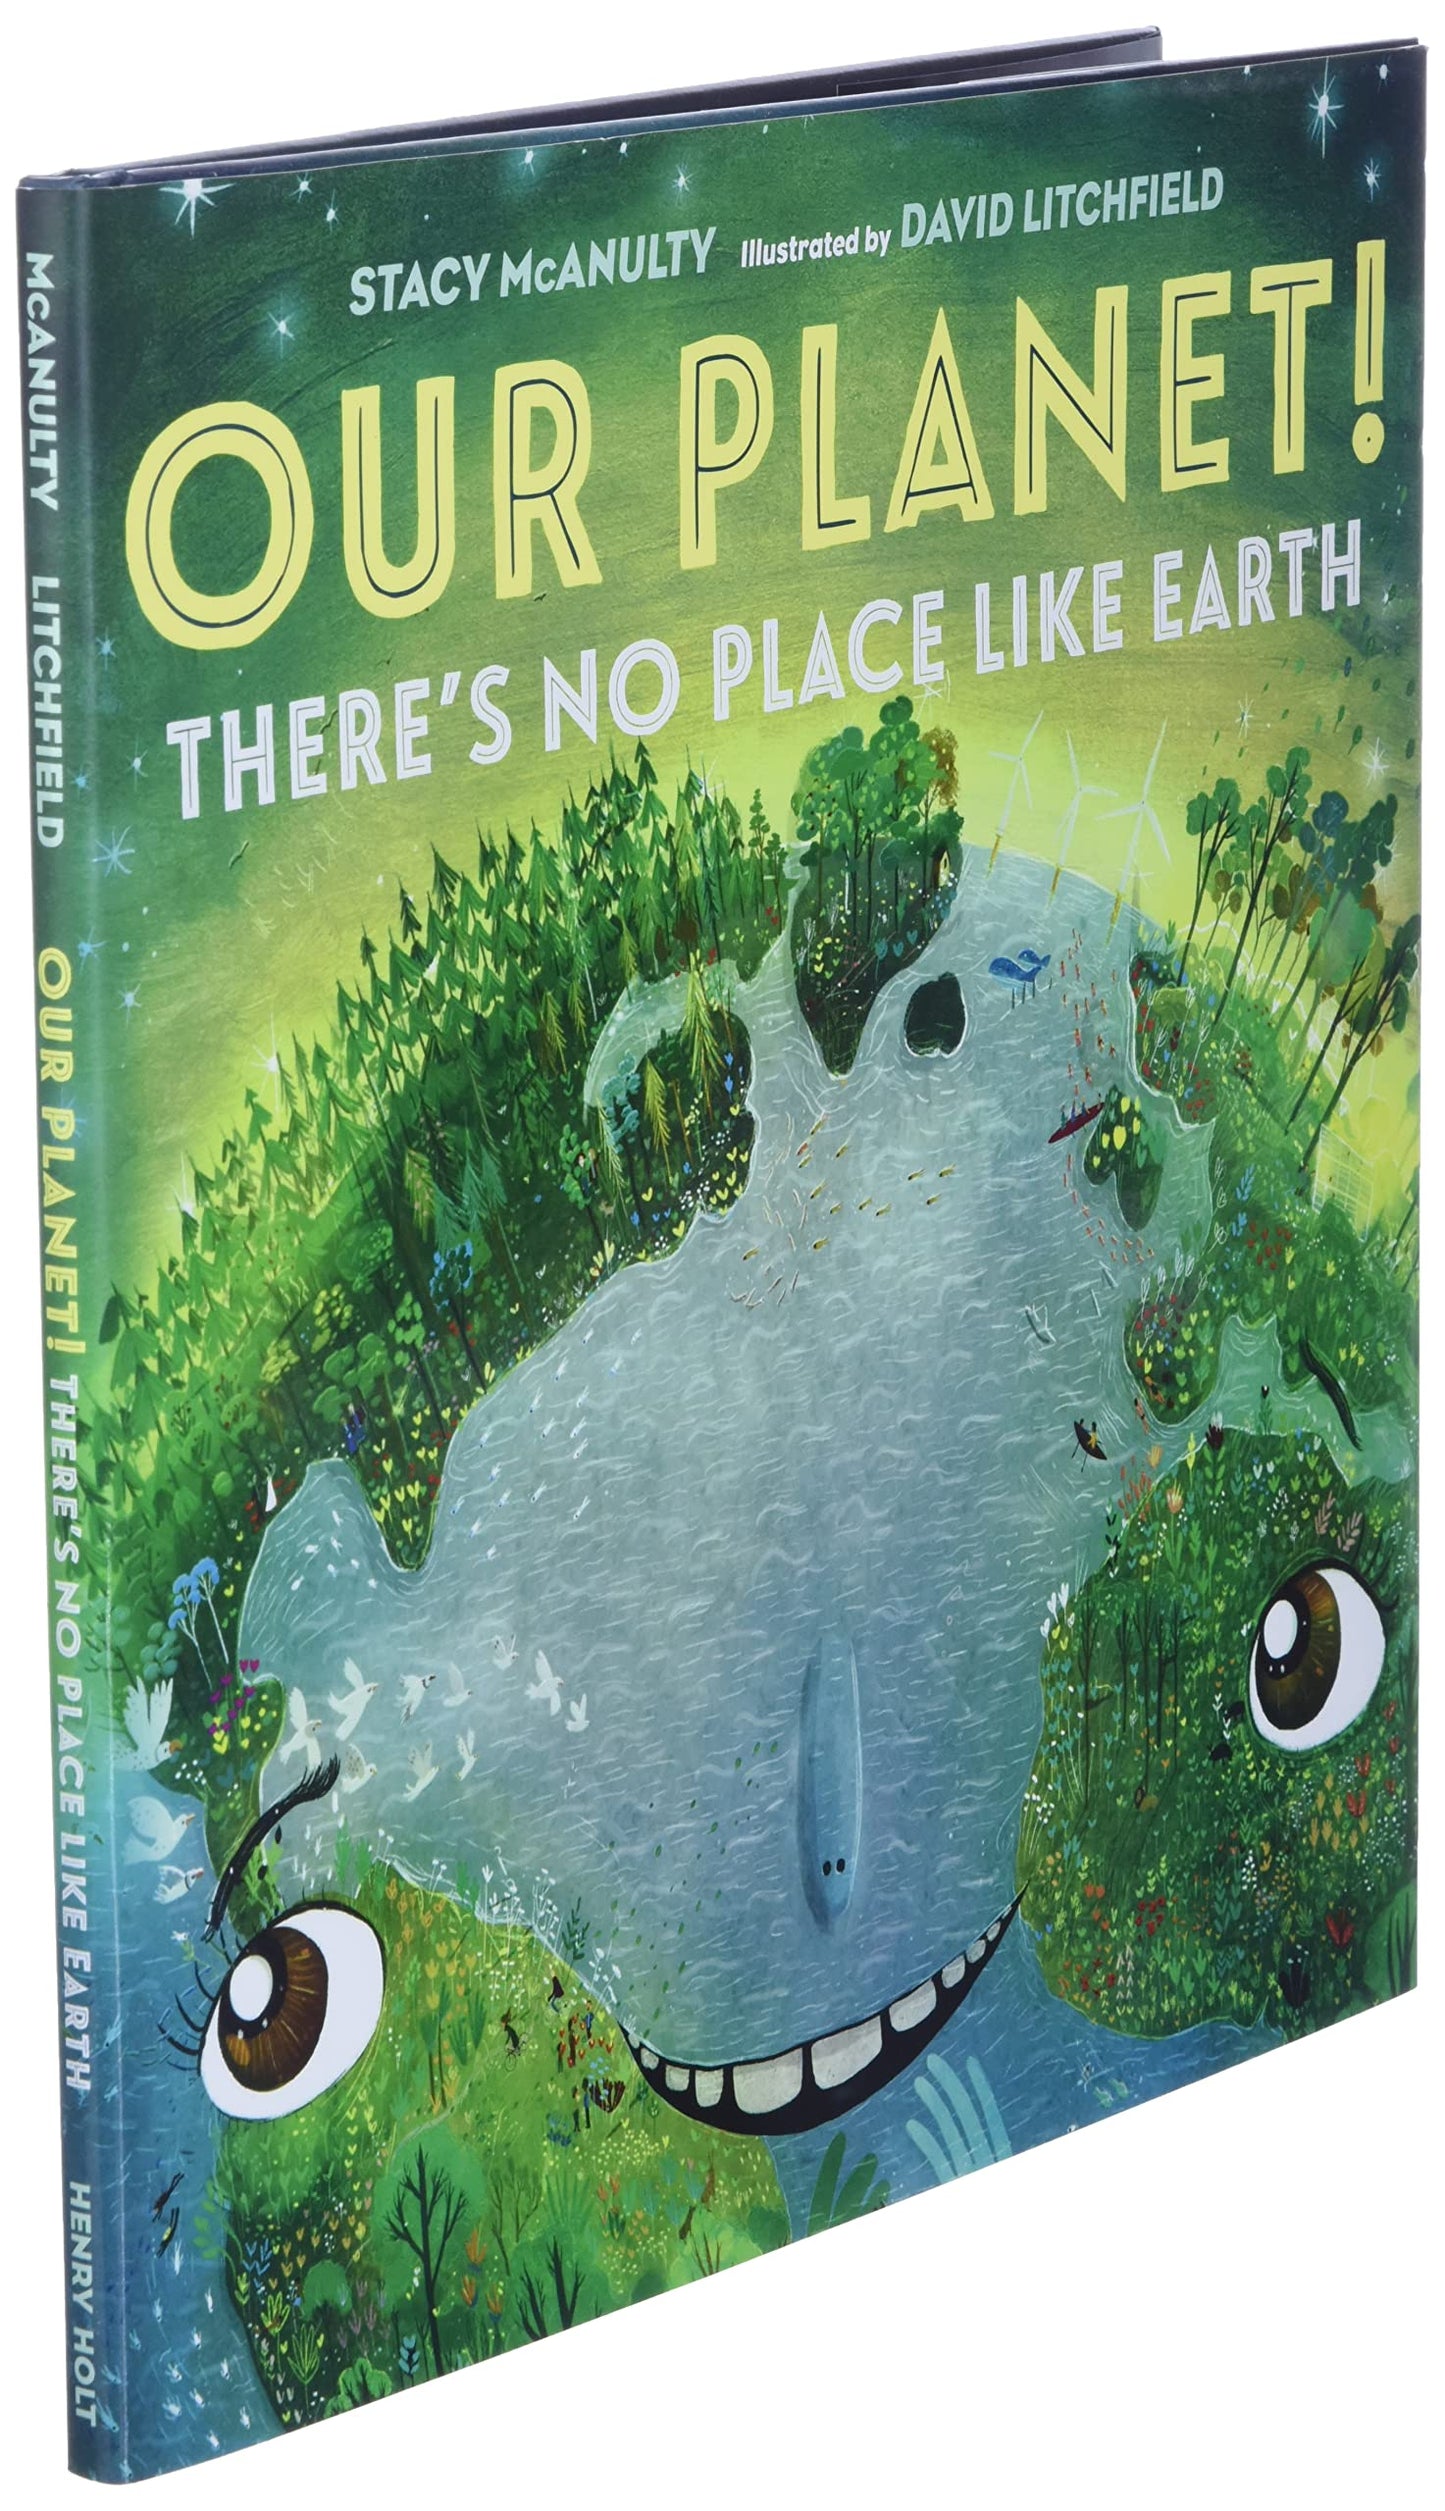 "Our Planet! There's No Place Like Earth" Book